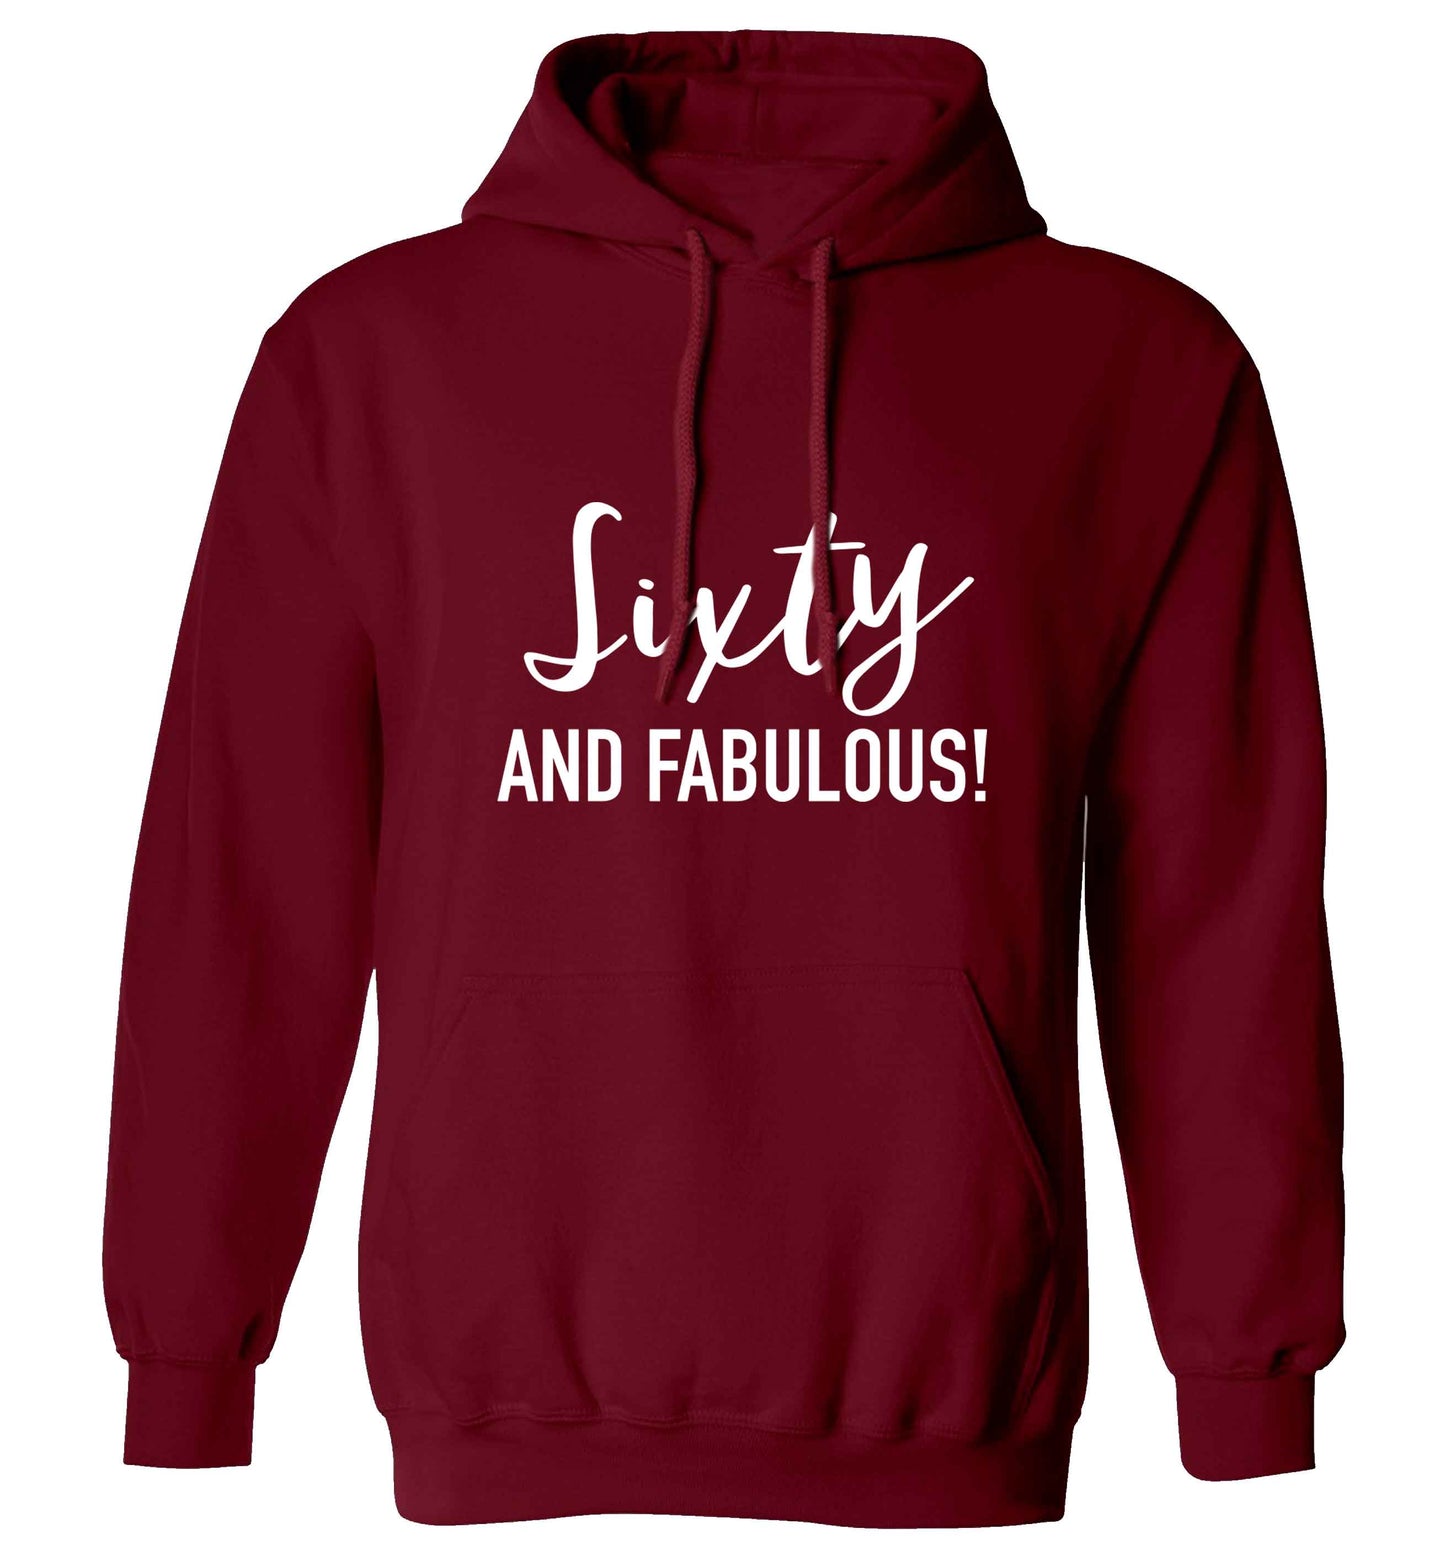 Sixty and fabulous adults unisex maroon hoodie 2XL